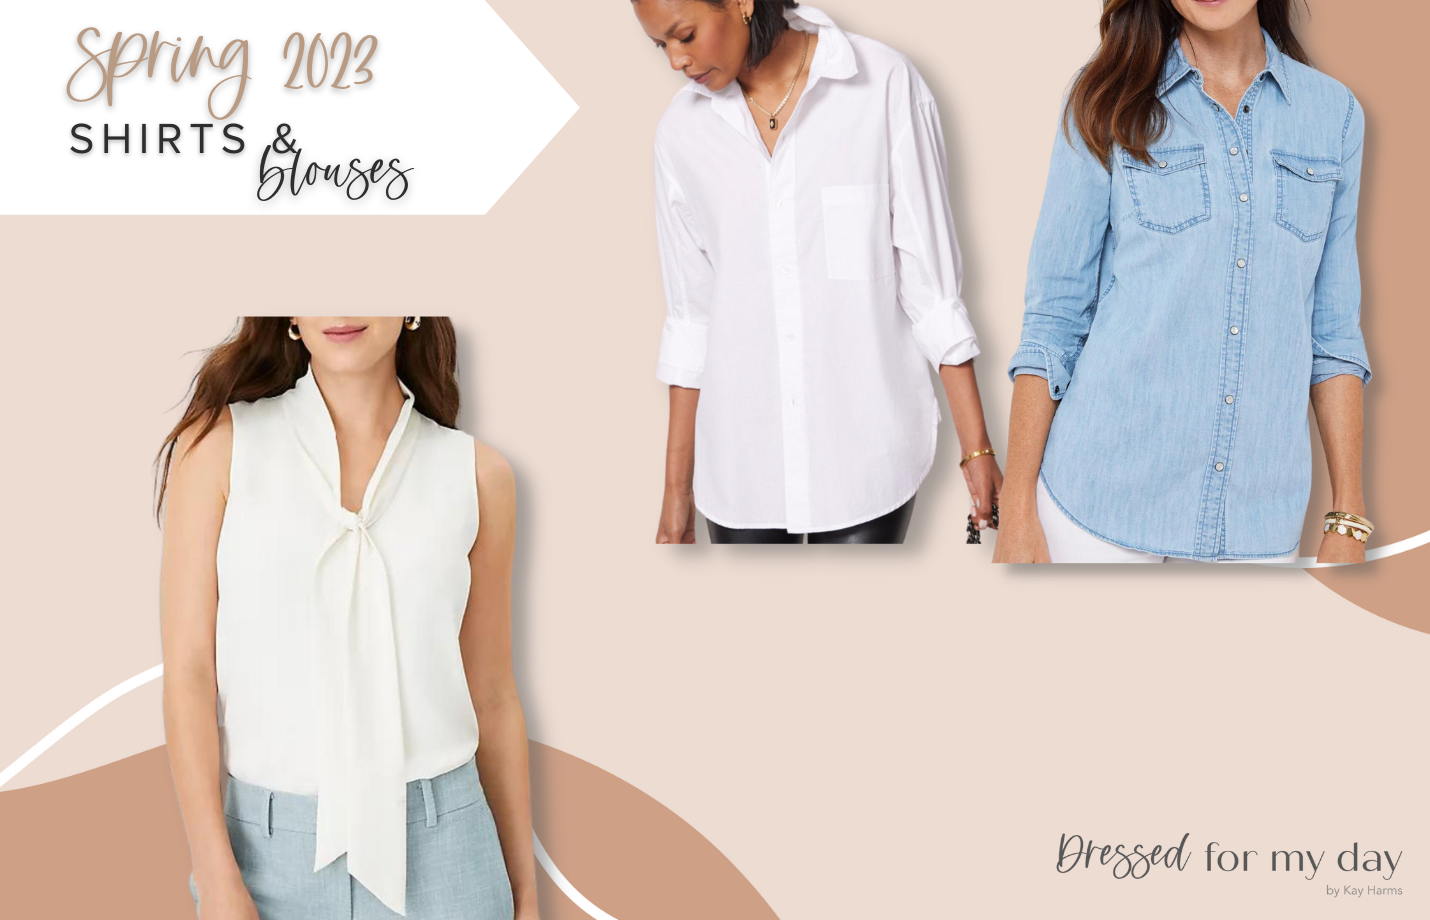 Button-Up Shirts & Blouses